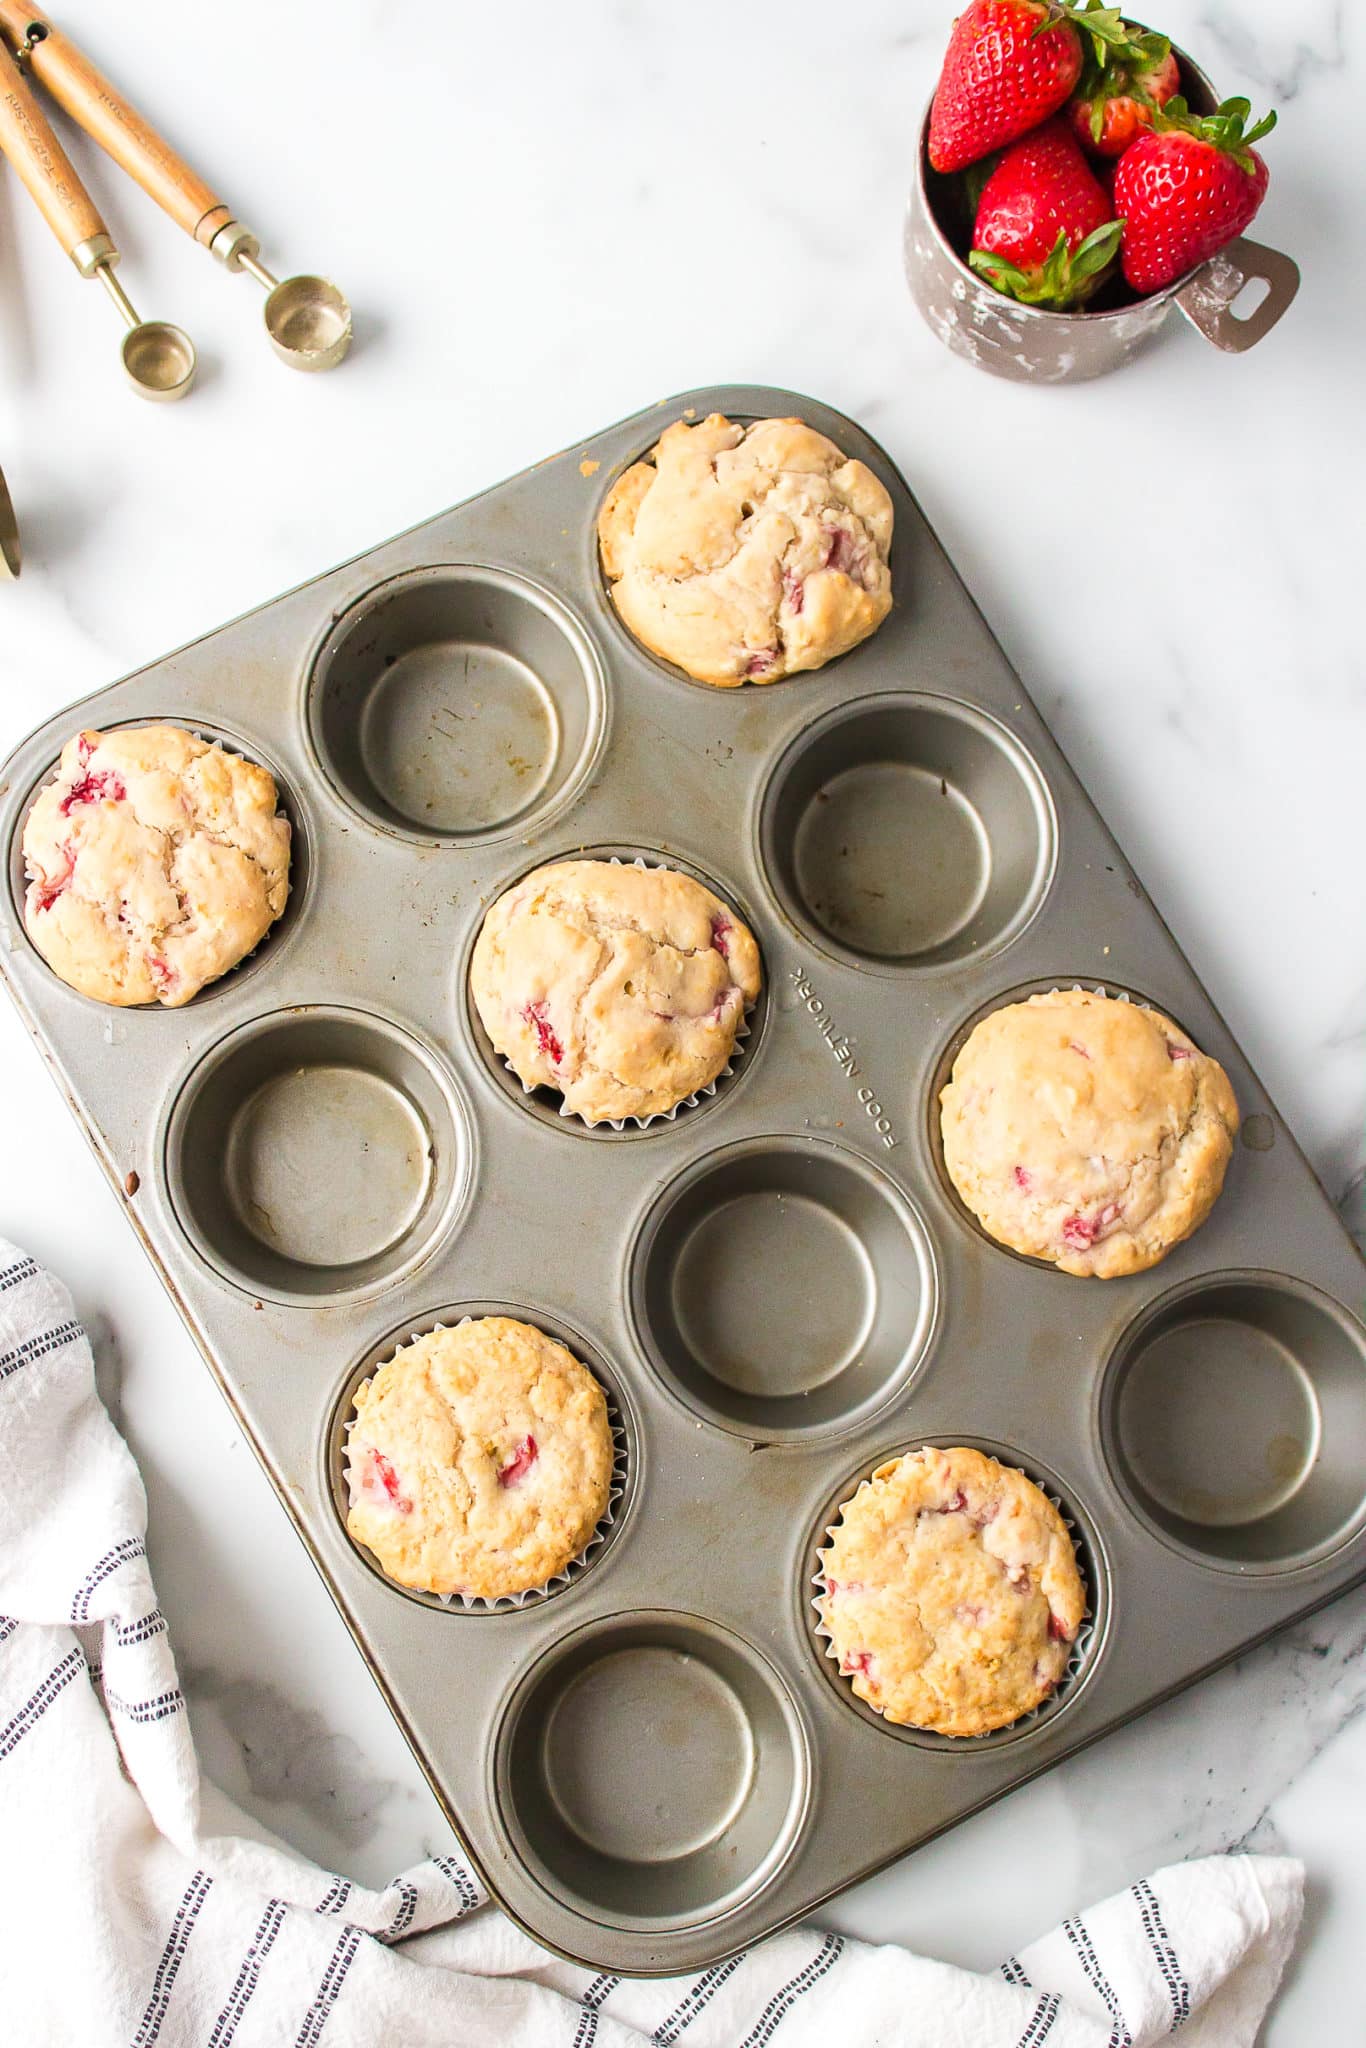 Strawberry muffins in papers in a muffin tin on a white surface.